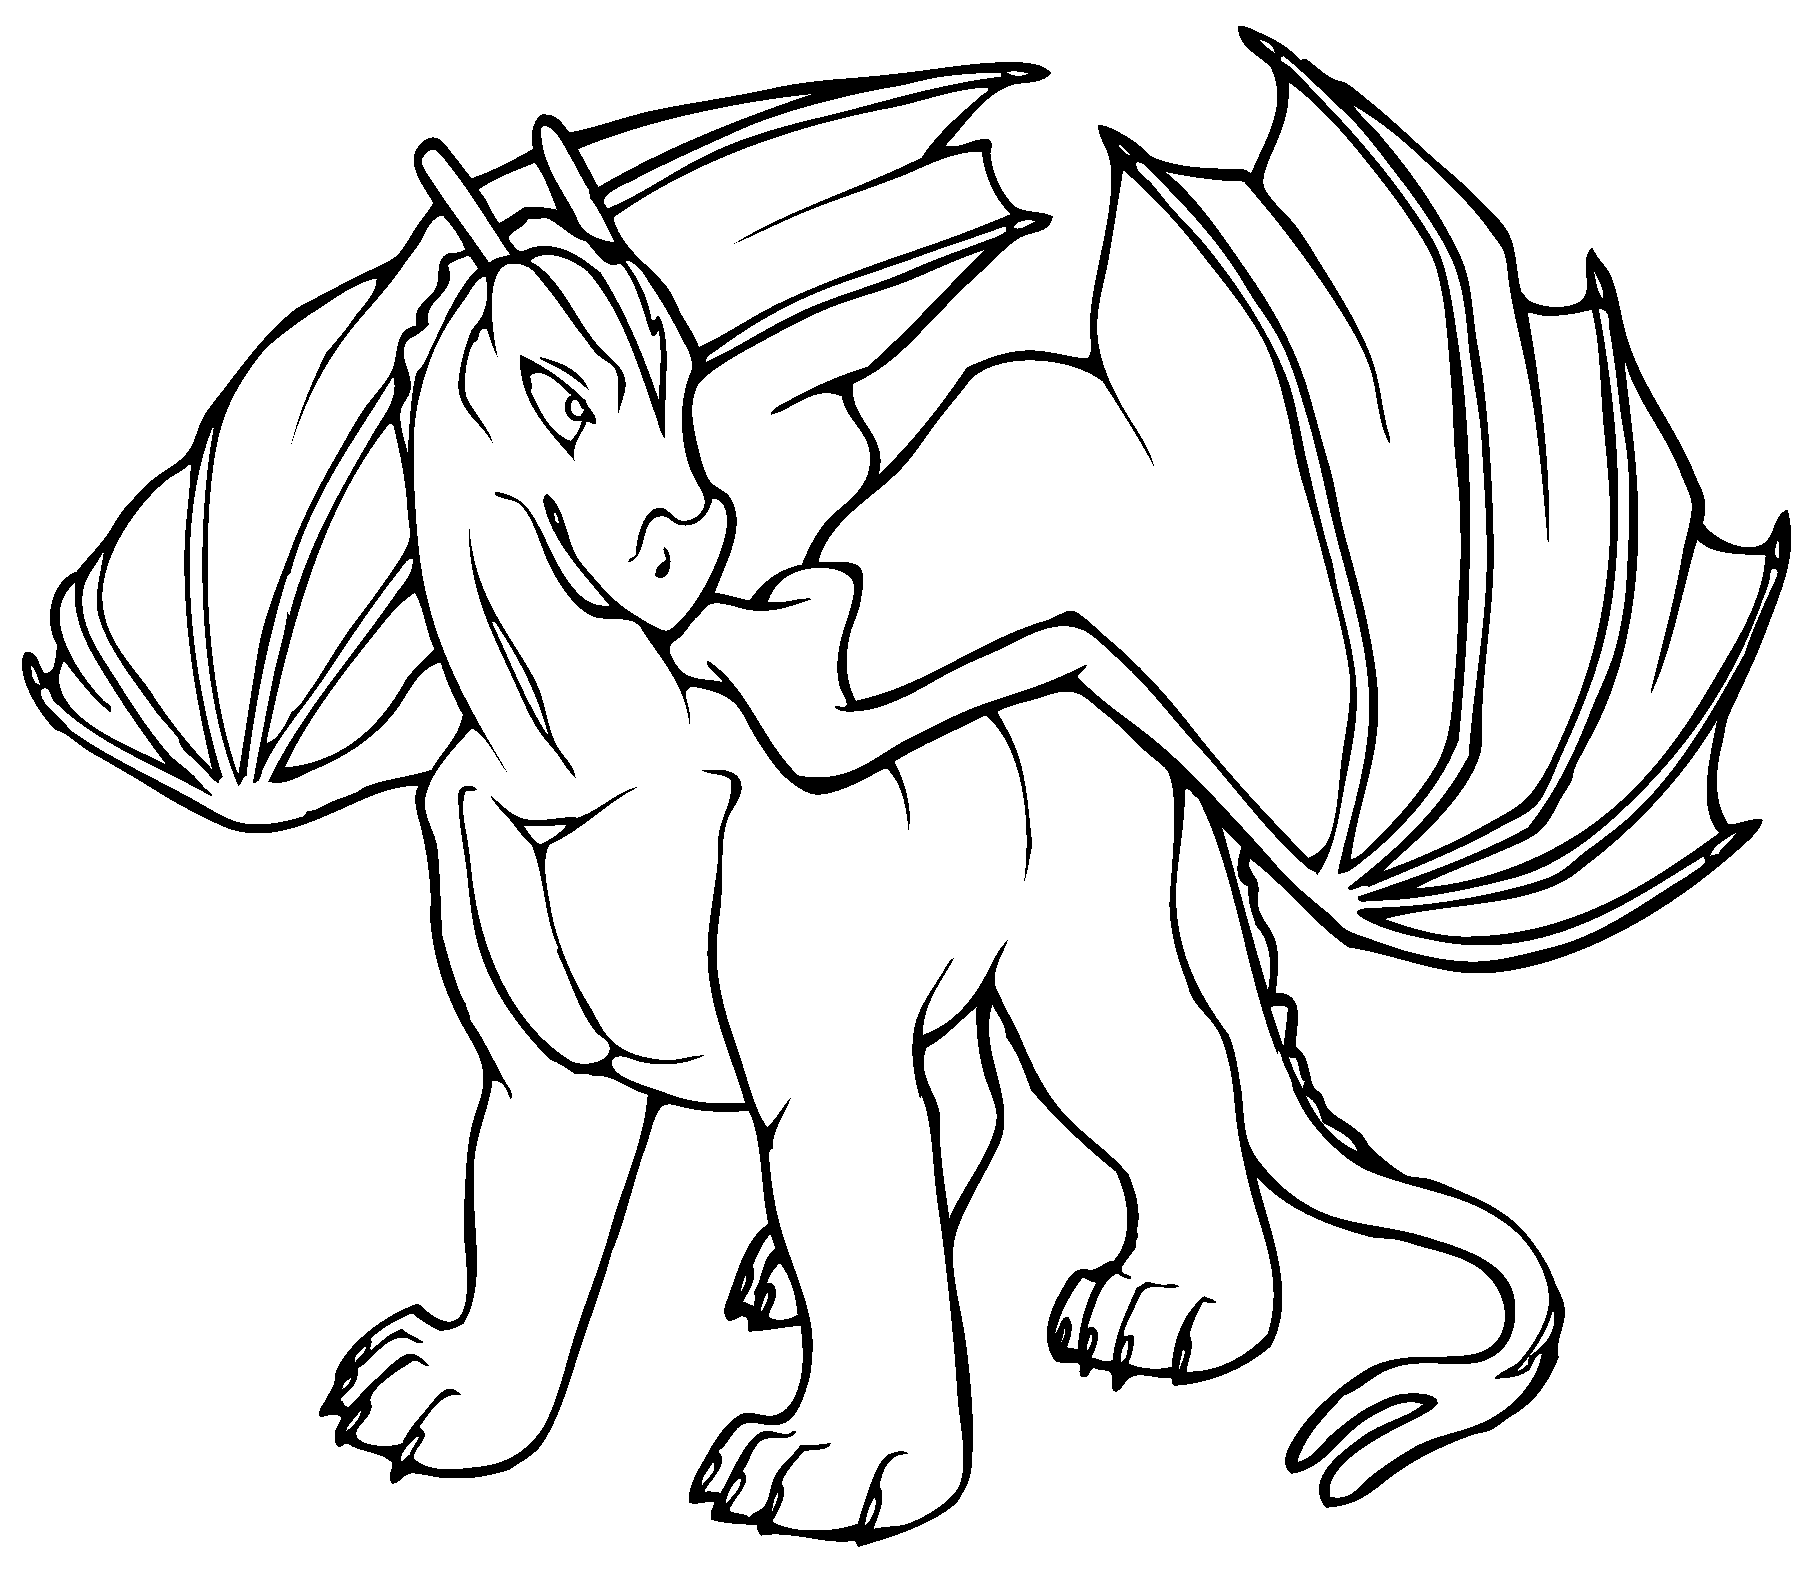 Cool Fire Dragon 25 Coloring Page